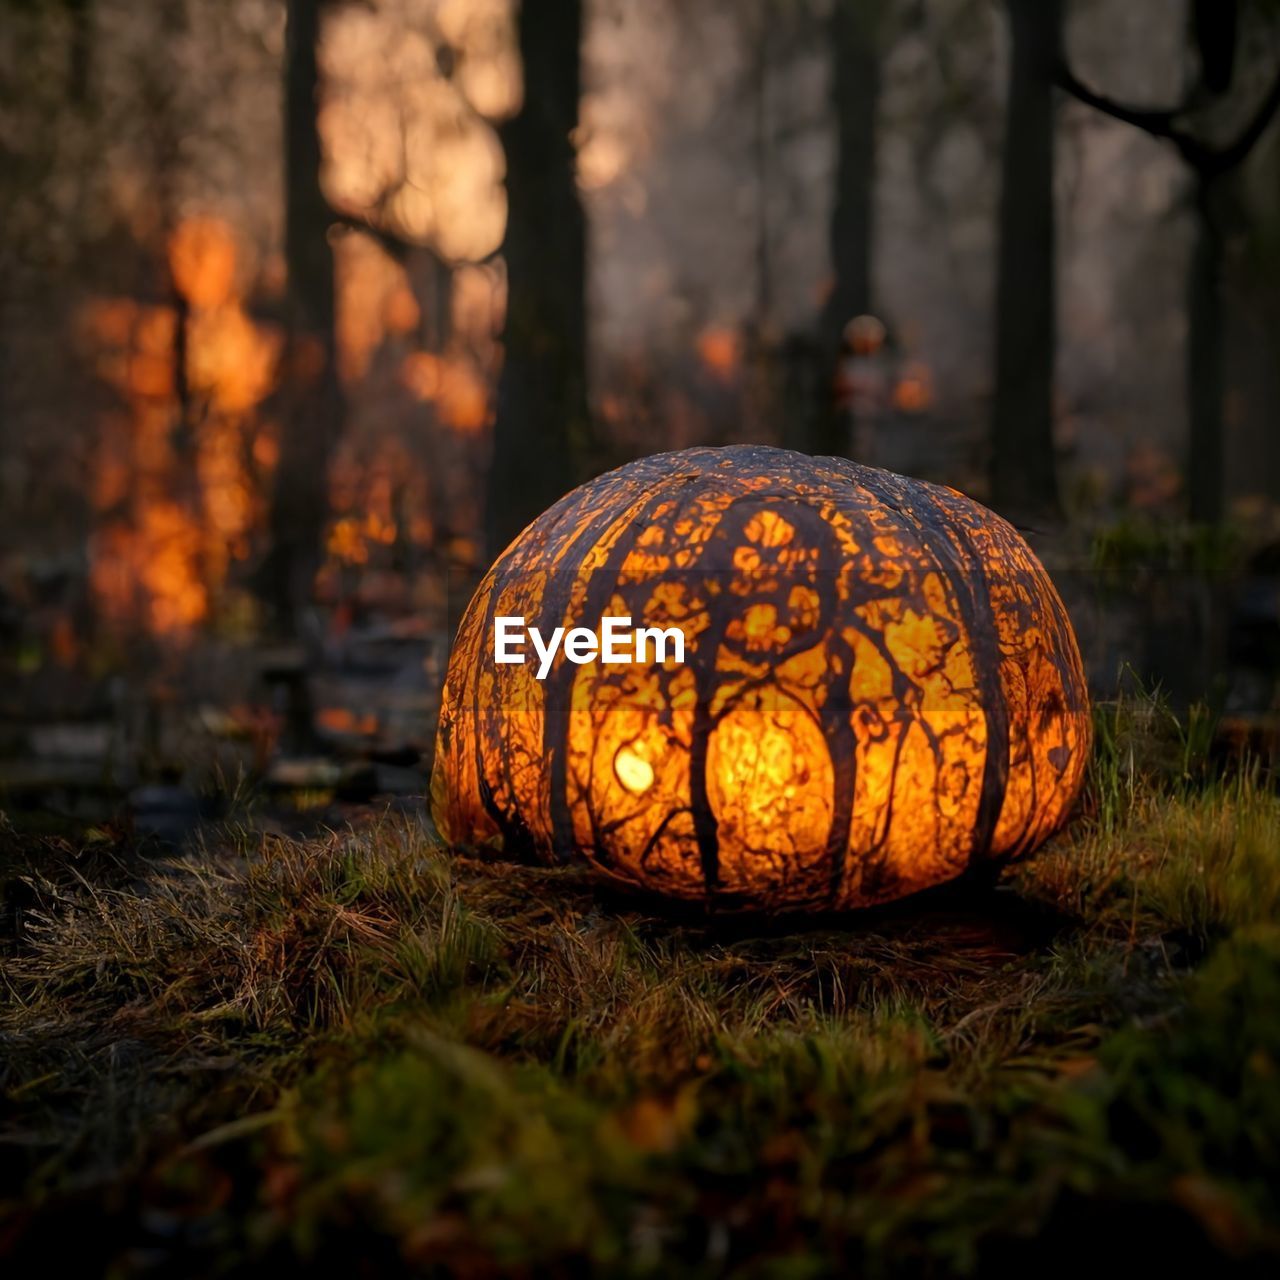 A large orange pumpkin lies on the grass and lanterns burn in a the forest